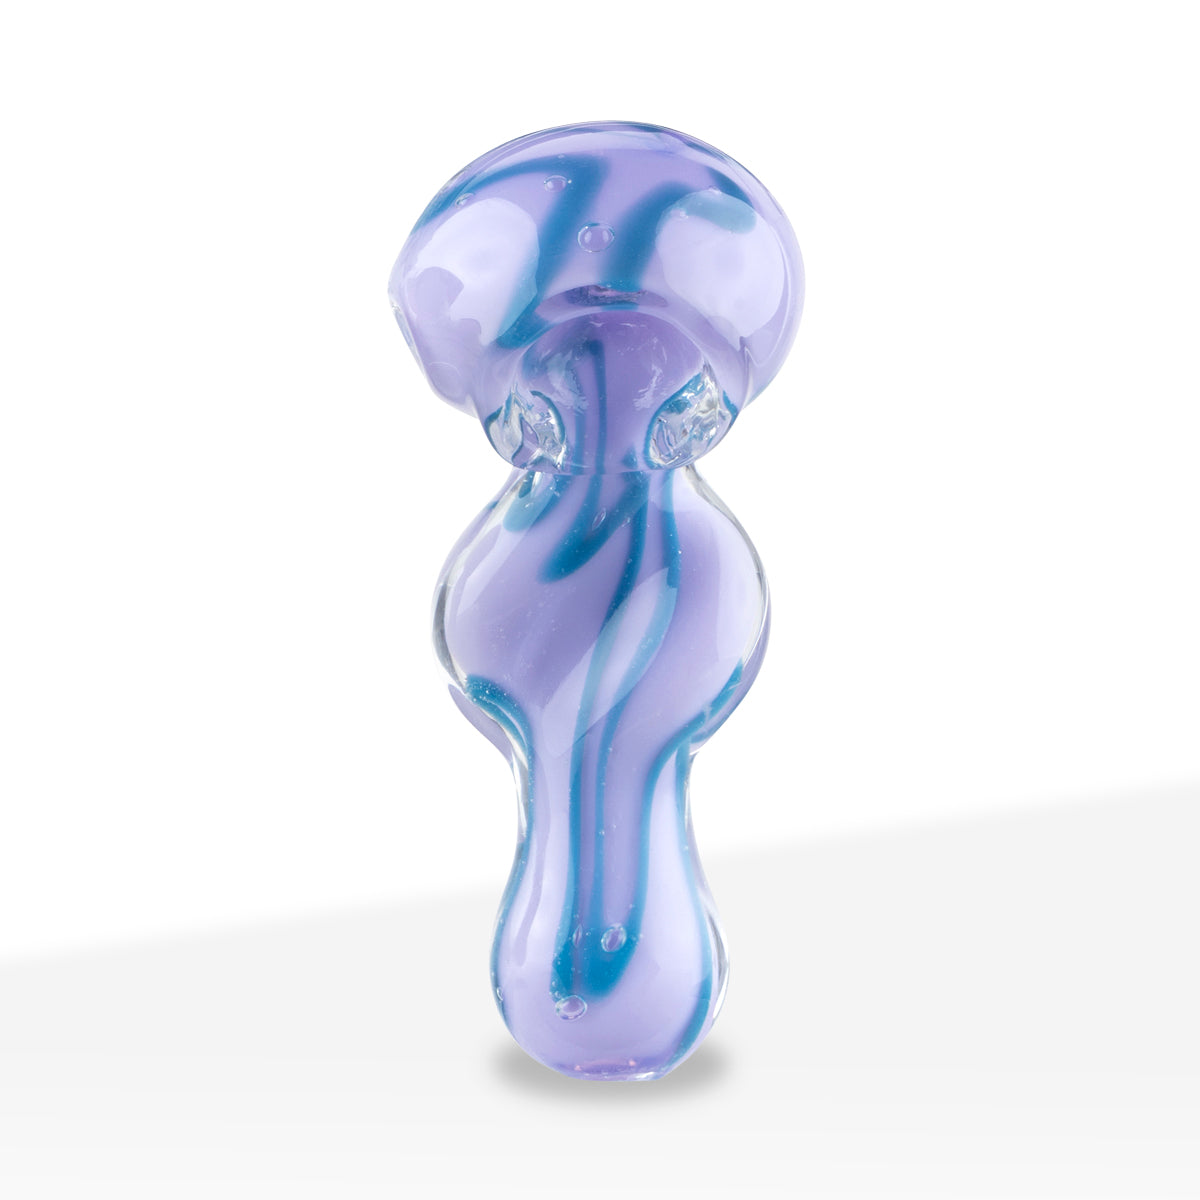 Hand Pipe | Classic Glass Spoon Slyme Swirled Bulge Hand Pipe | 3.5" - Glass - 3 Count